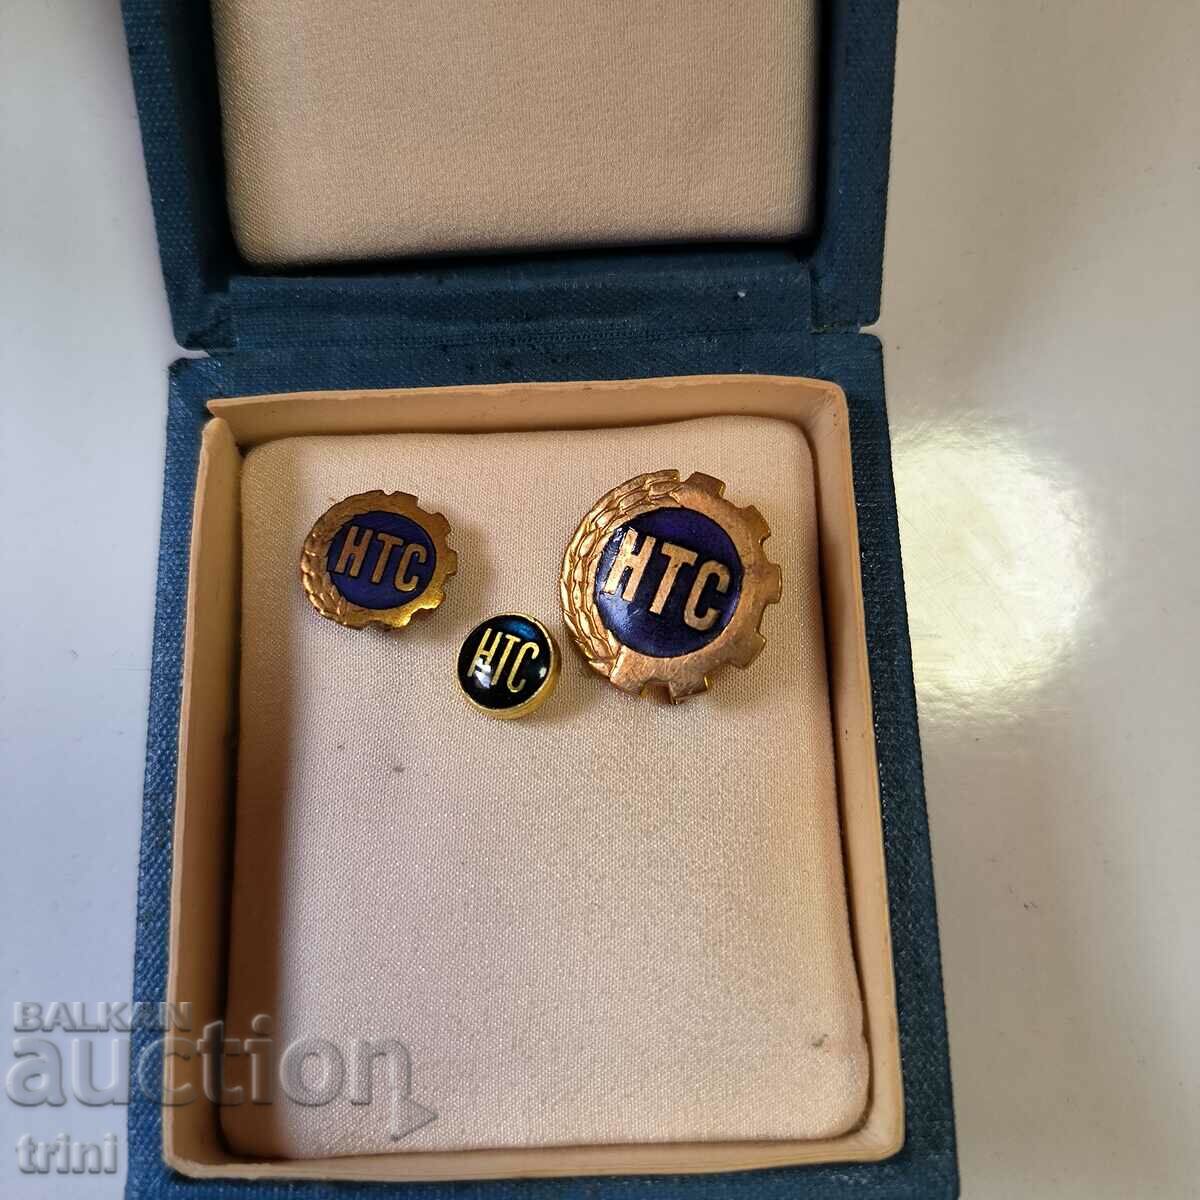 Lot of S&T badges with original box